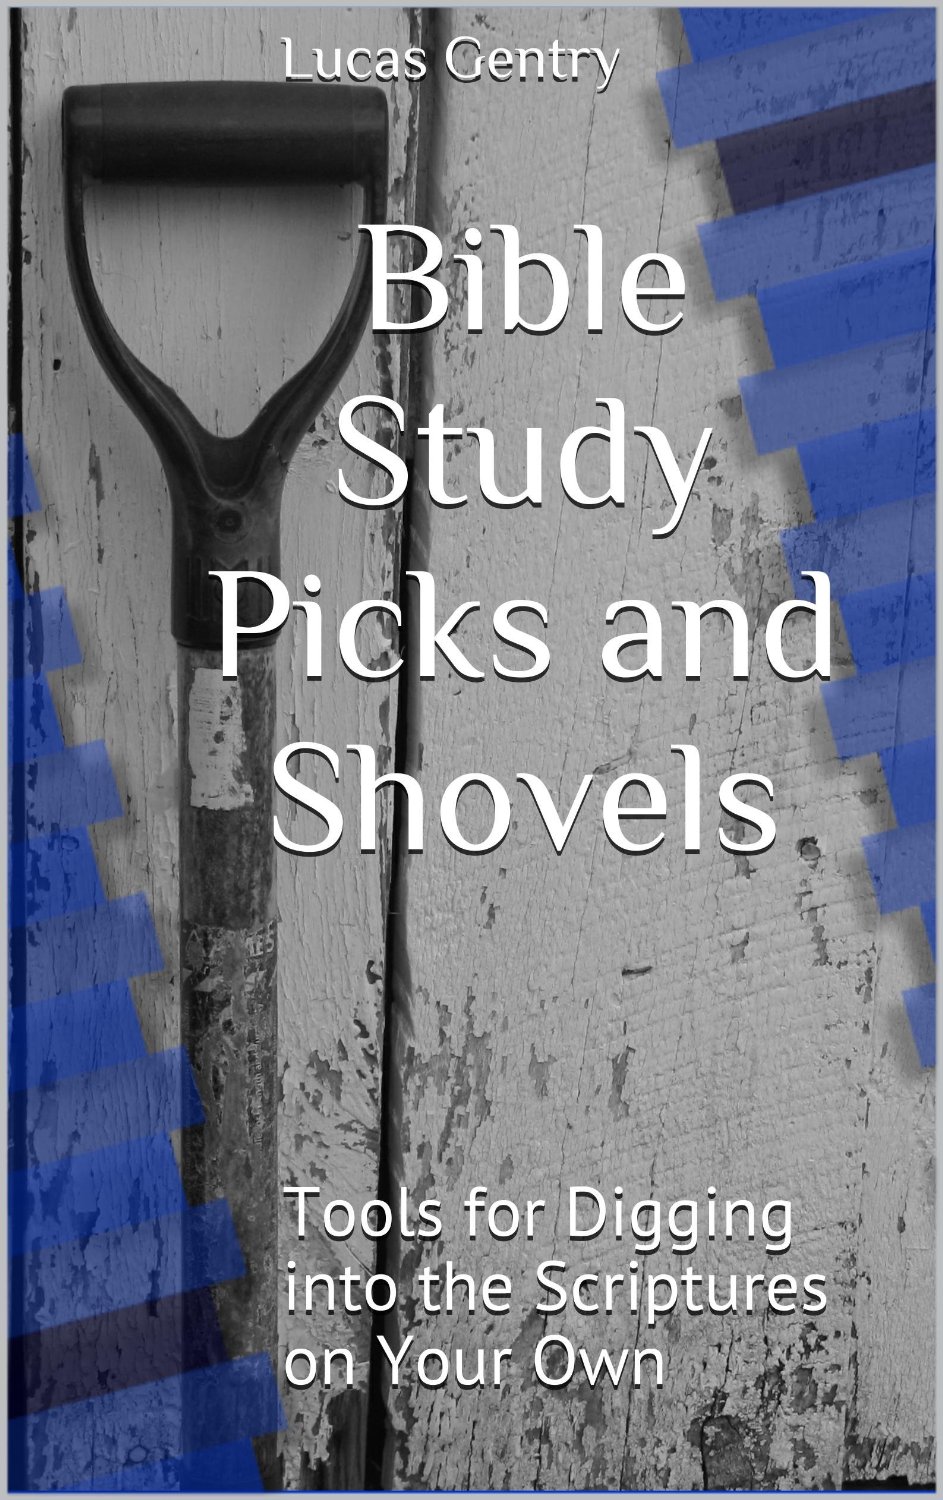 Bible Study Picks and Shovels by Lucas Gentry